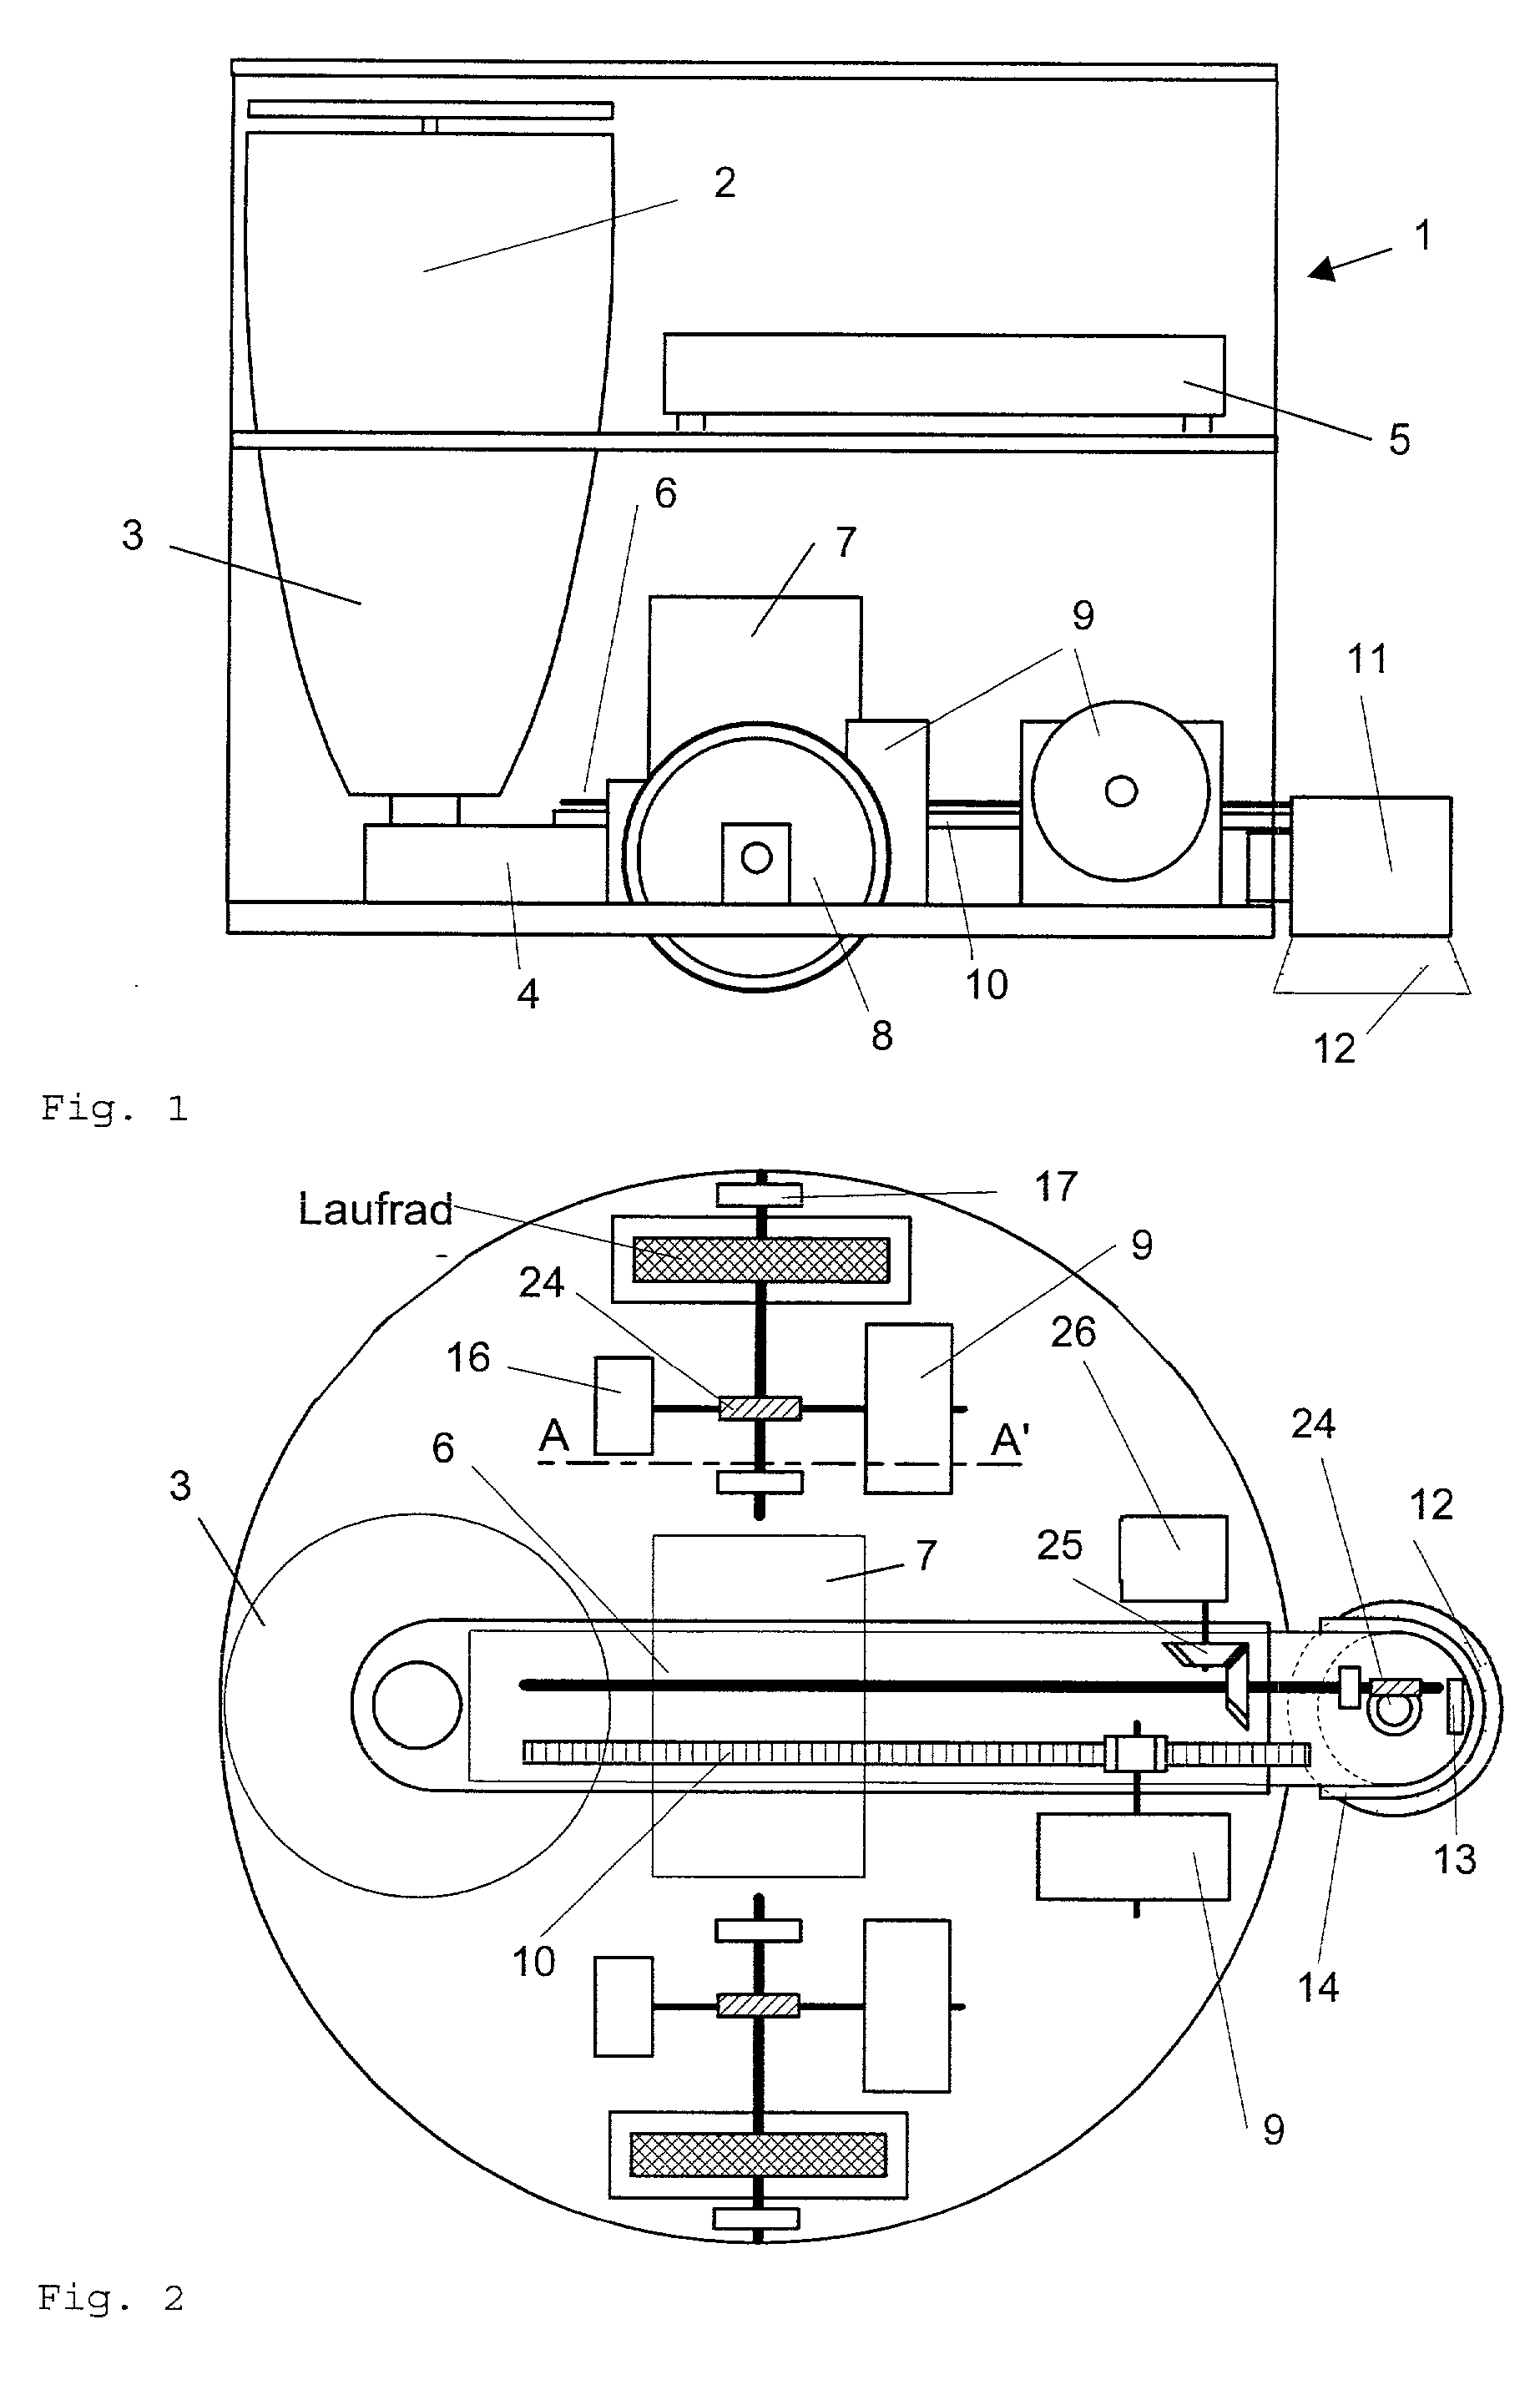 Service robot for the automatic suction of dust from floor surfaces